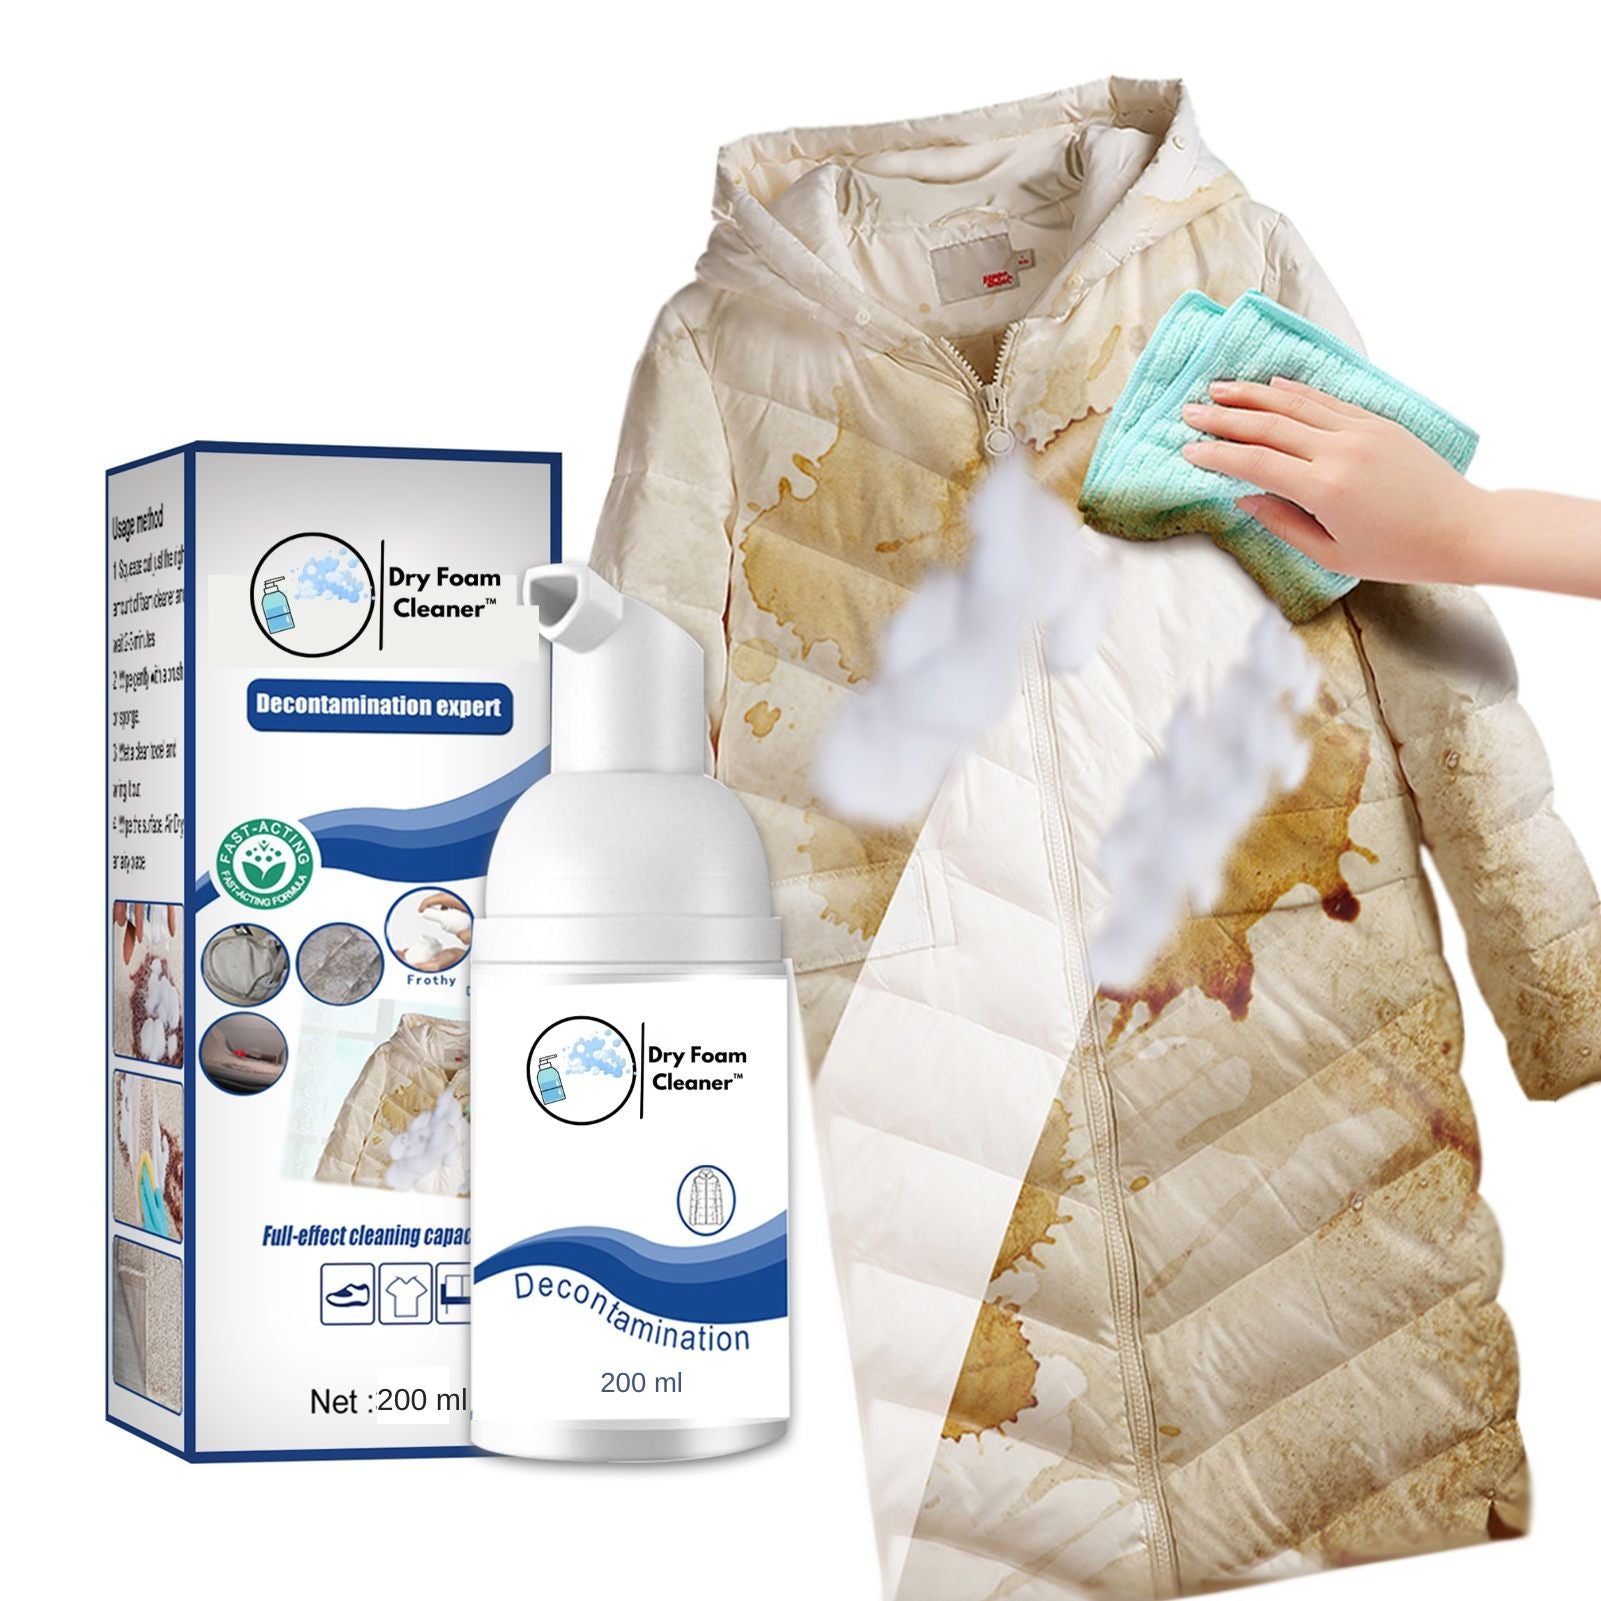 Foam Cleaner Down Jacket Cleaner Waterless Dry Cleaner For